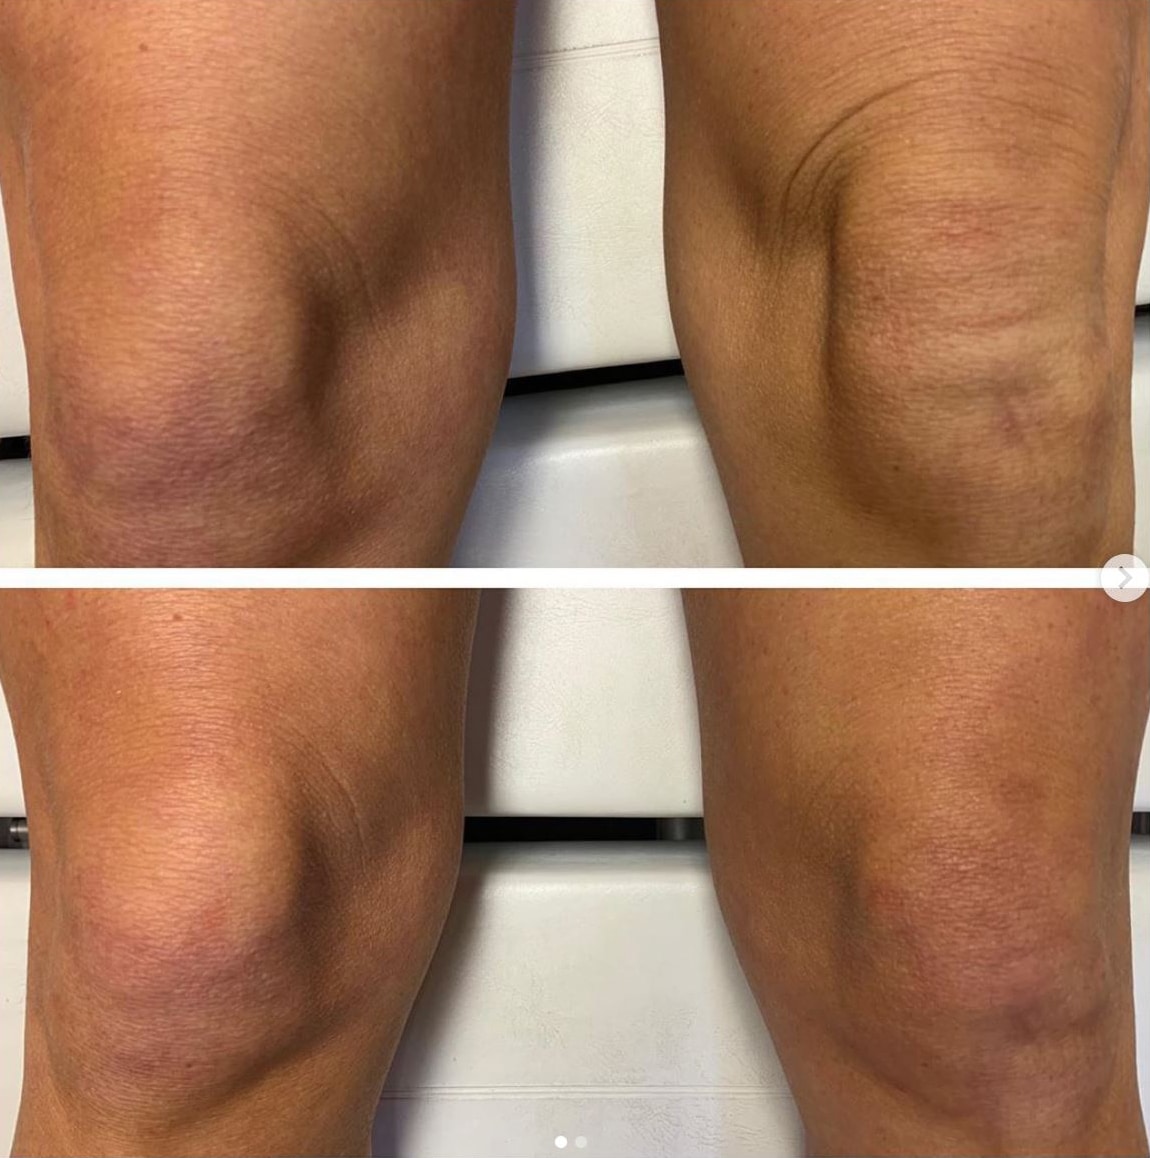 Knee wrinkles lifted with pdo threads.